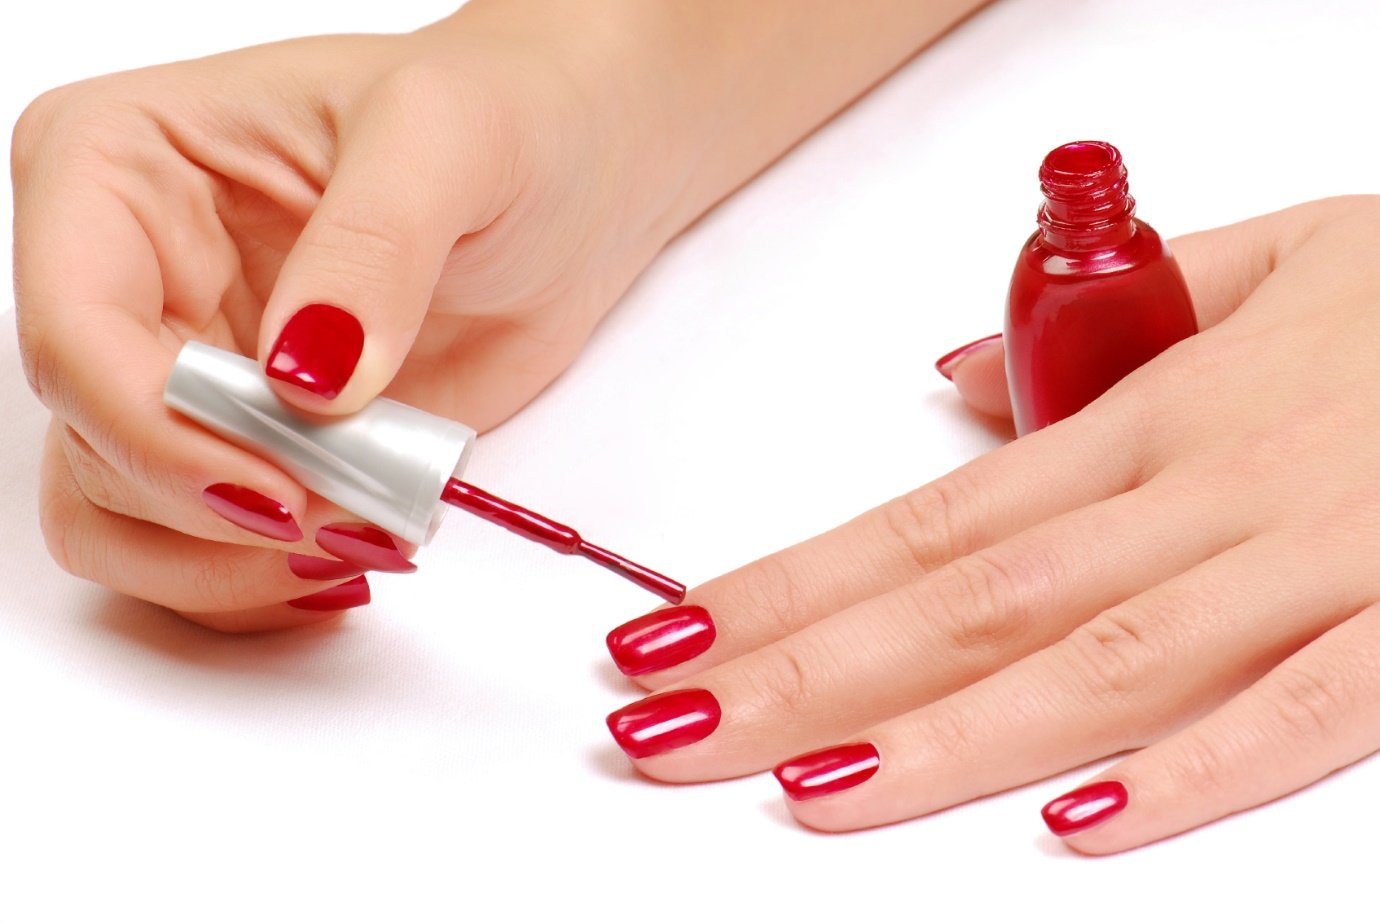 How to Apply Nail Polish to Paint Your Nails like a Pro